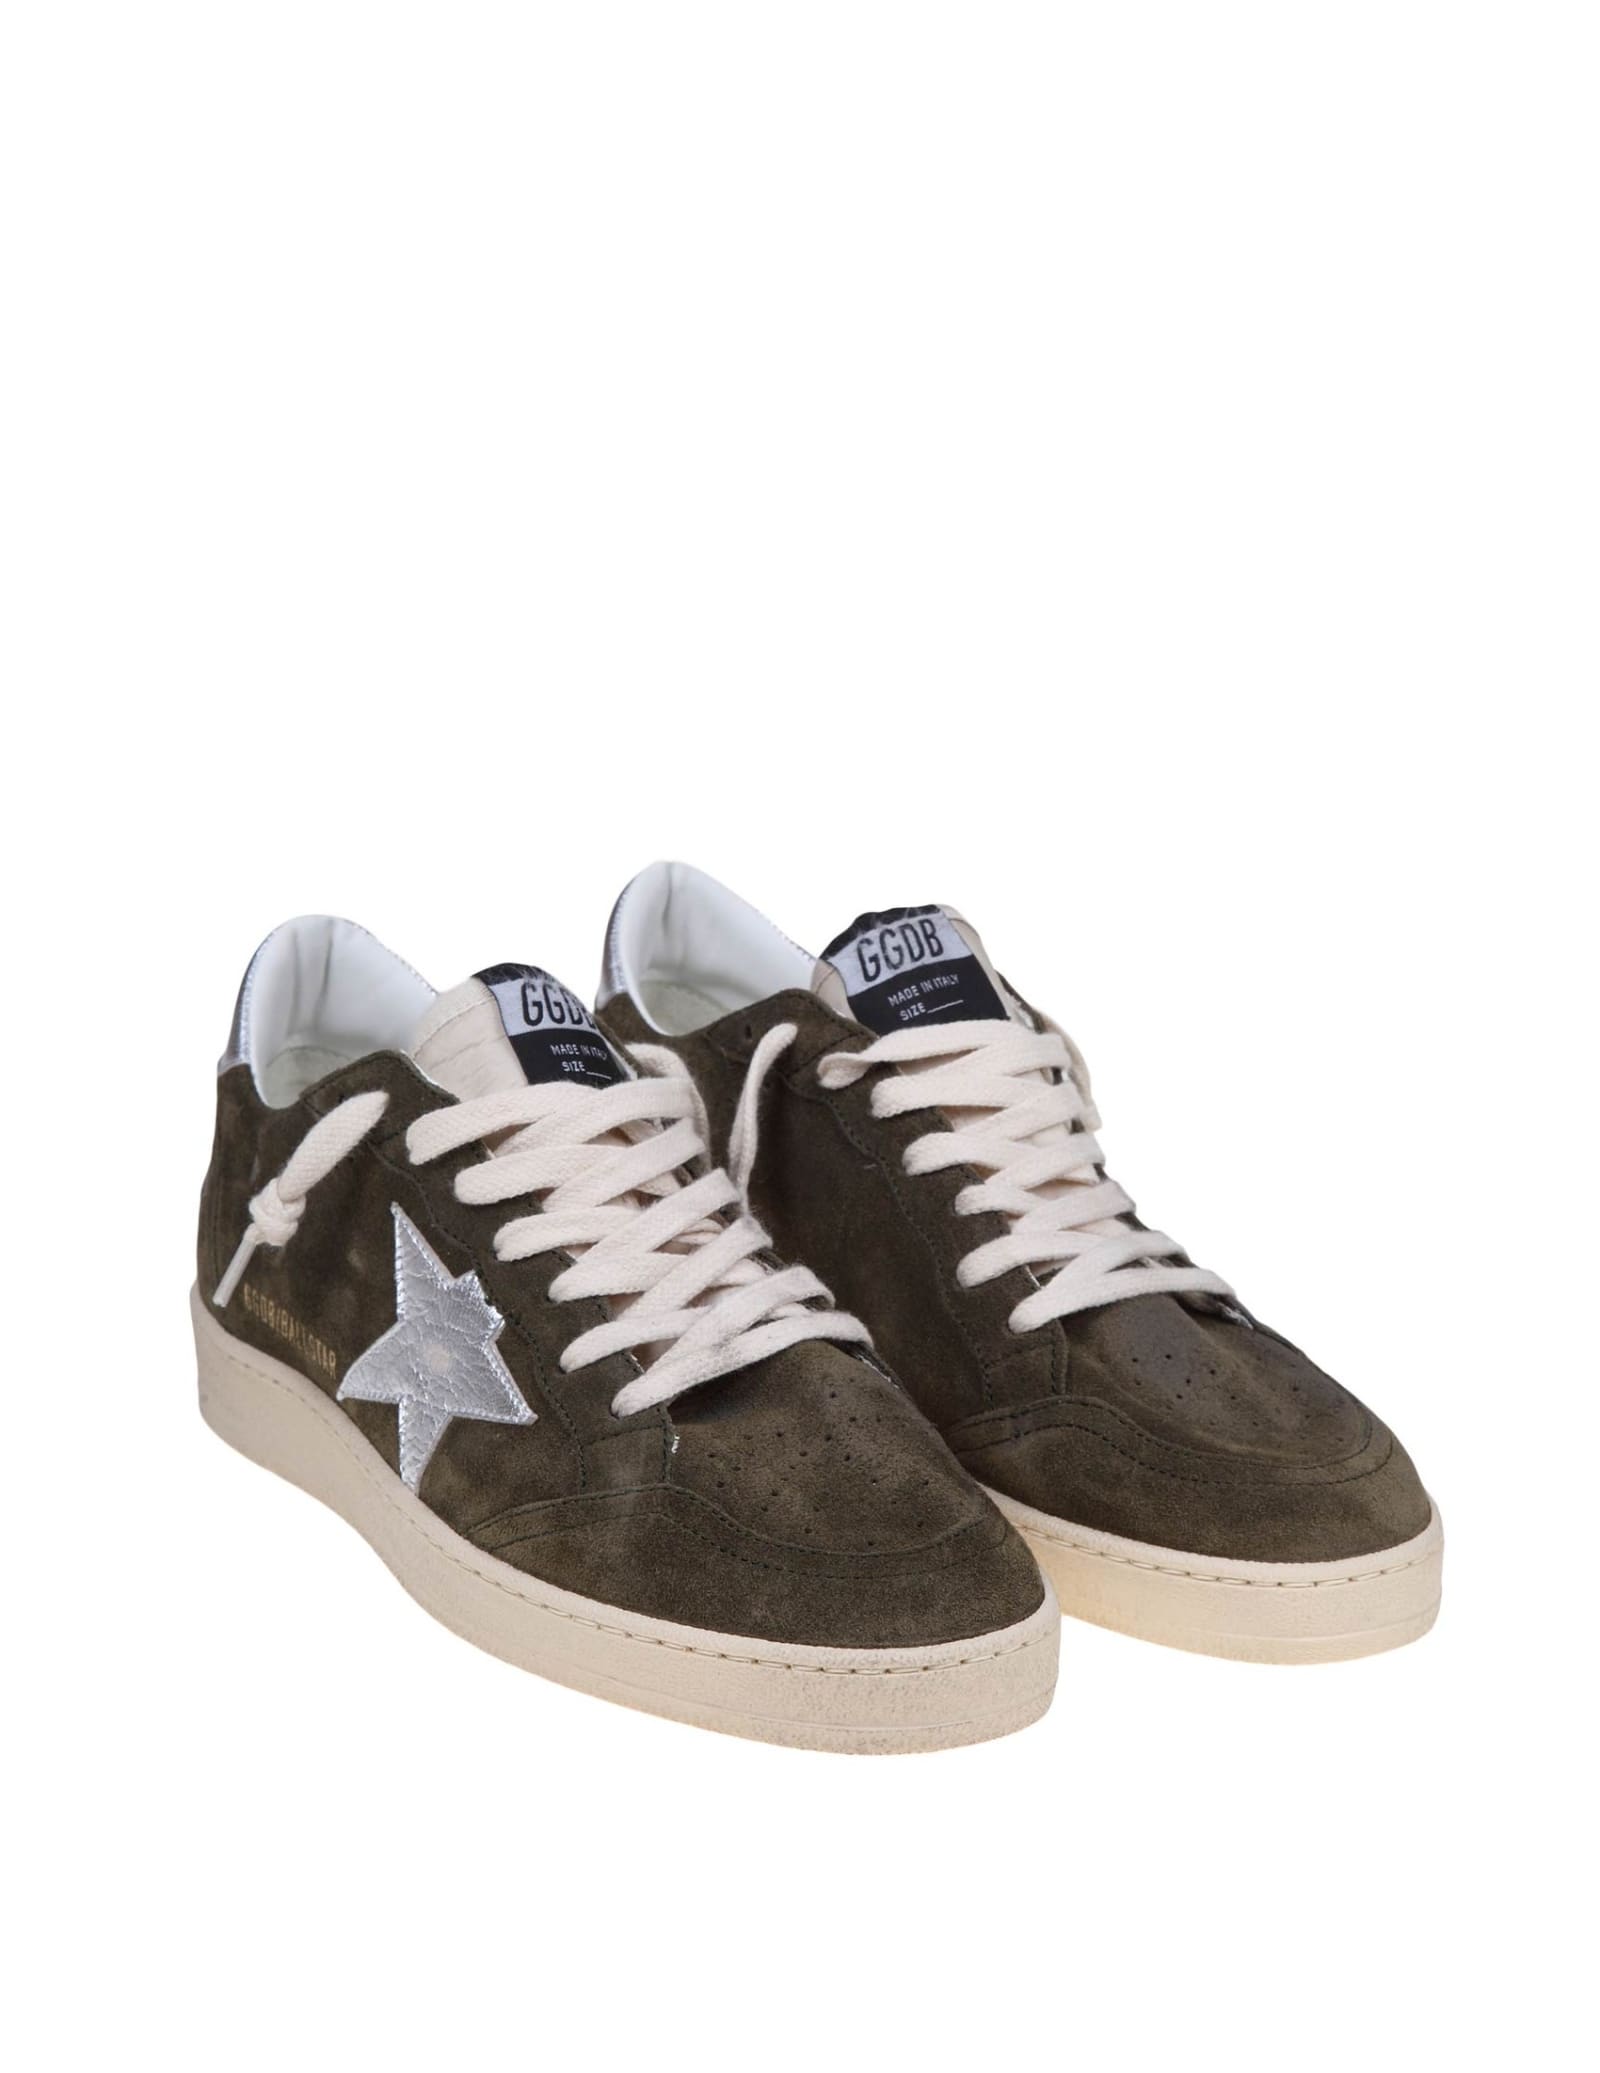 Shop Golden Goose Ball Star Sneakers In Olive Green Suede In Olive Night/silver